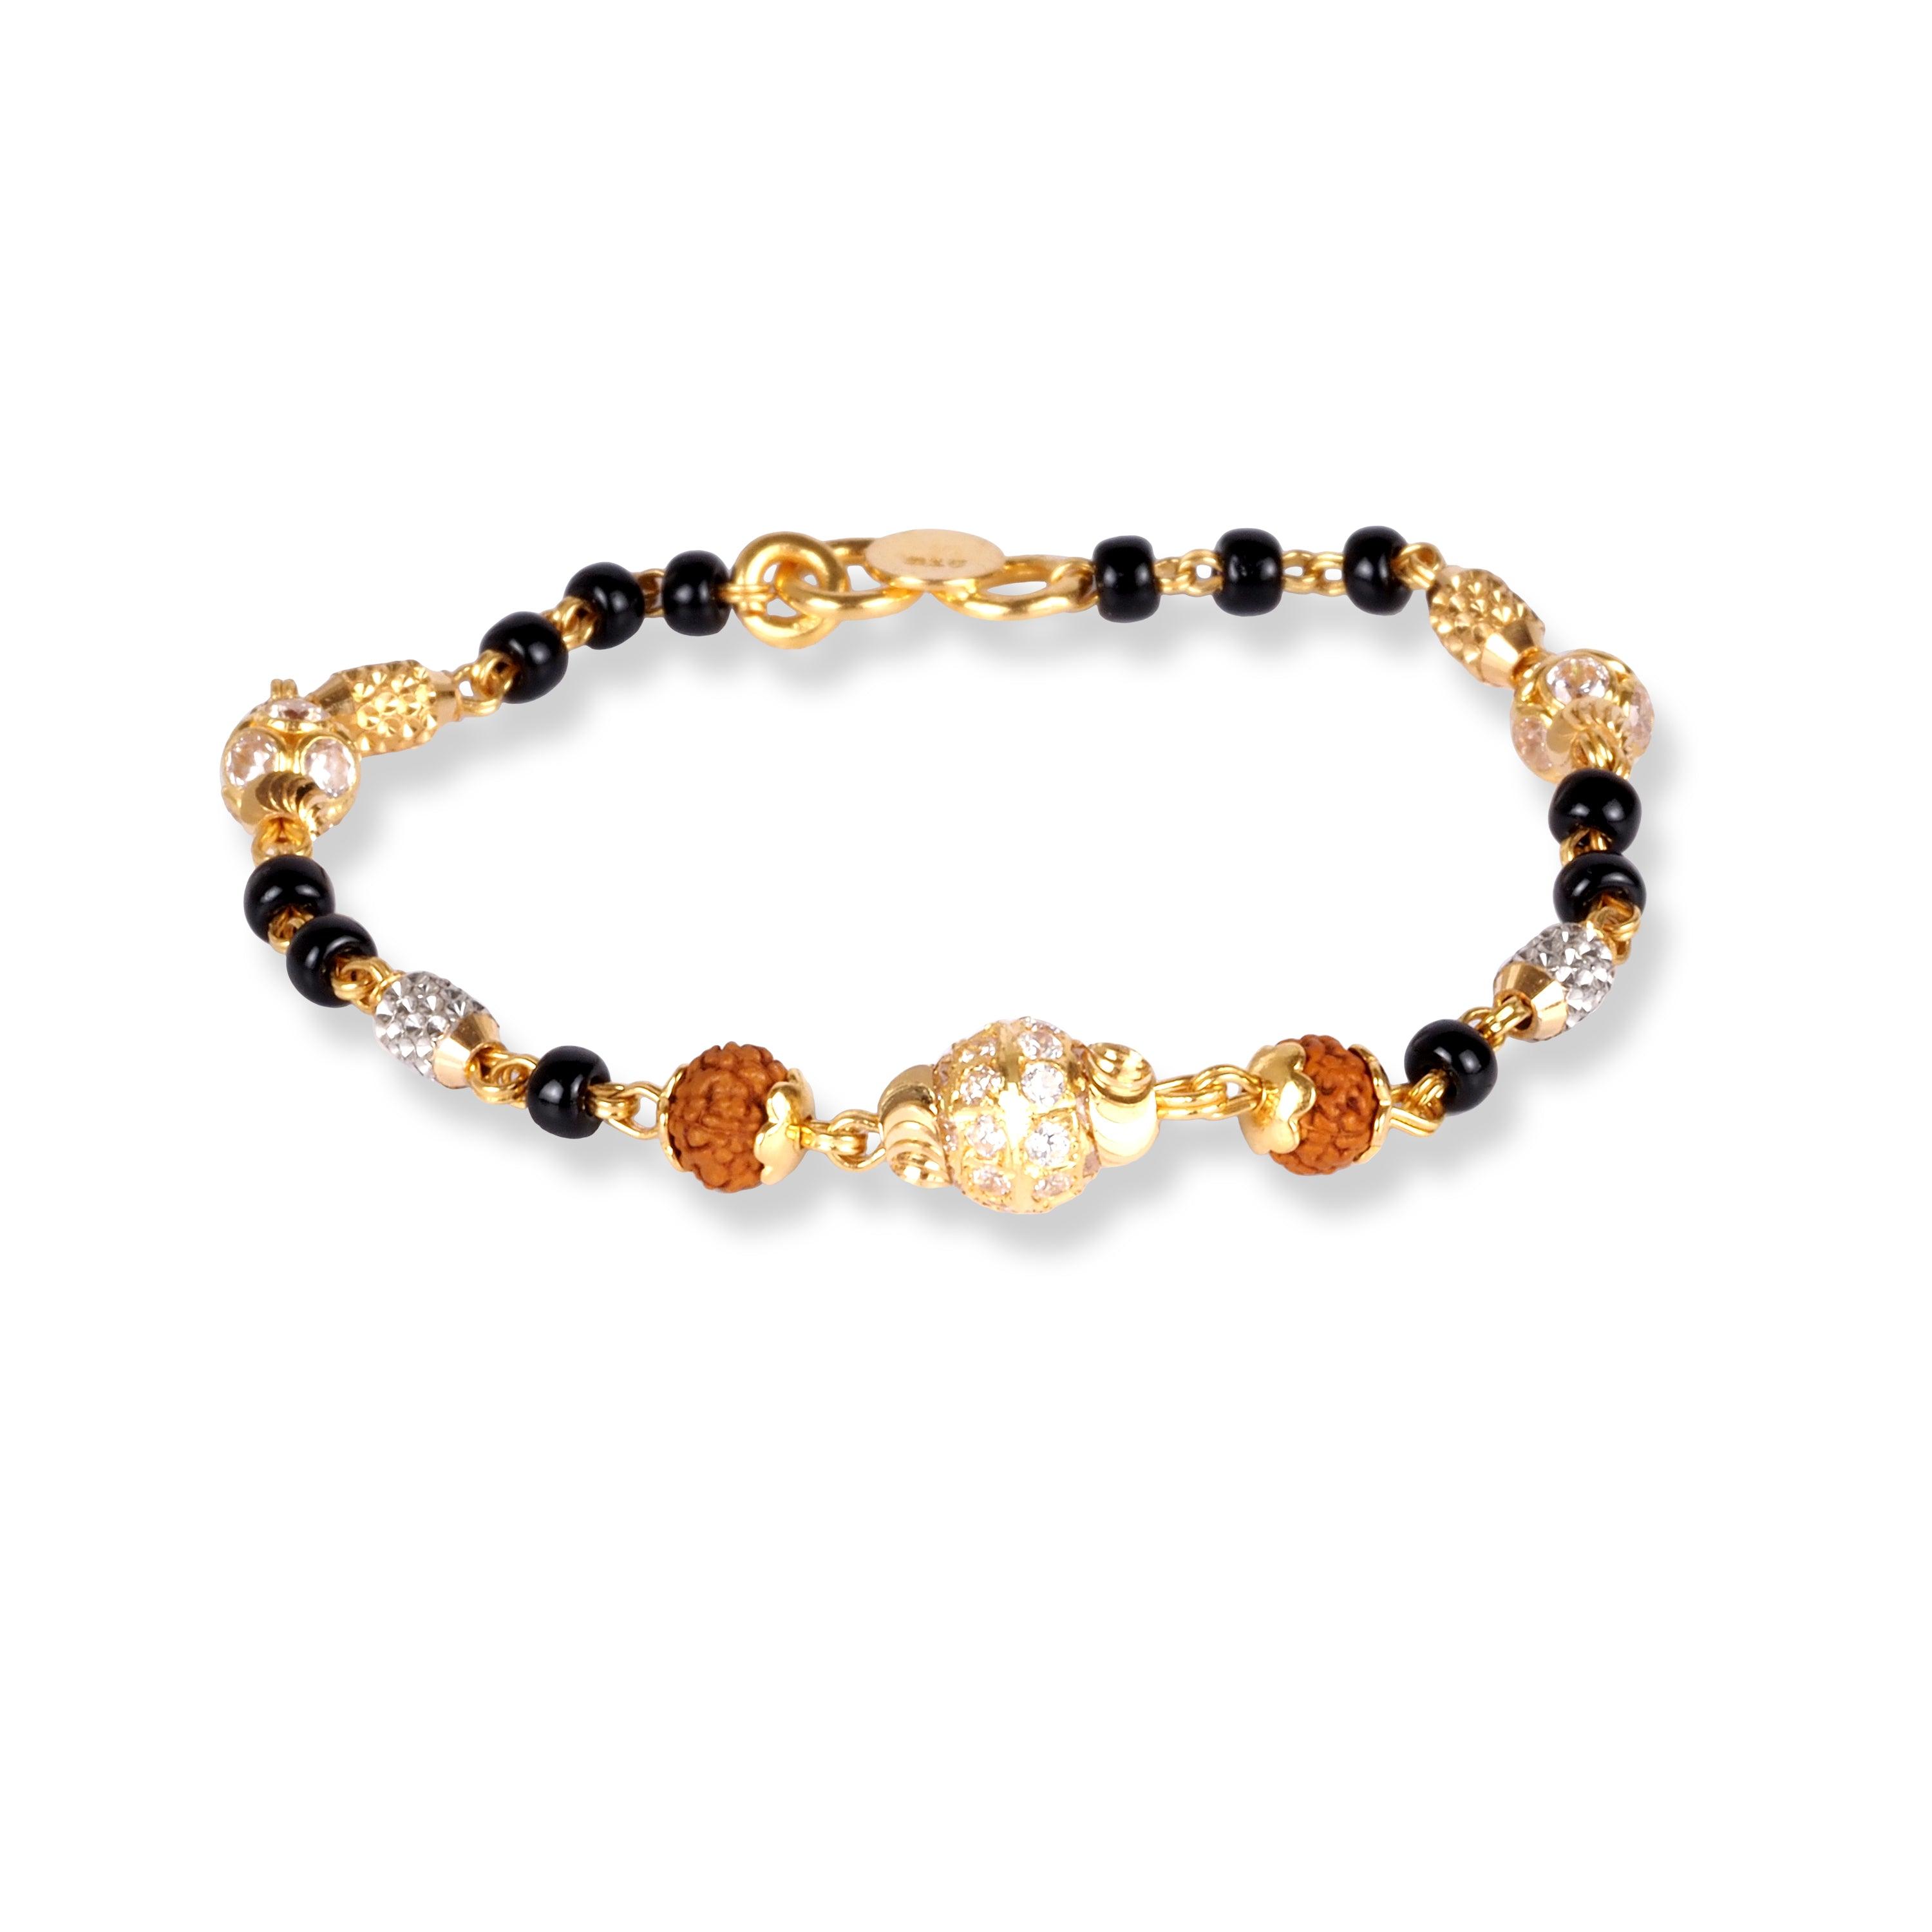 22ct Gold Children's Bracelets with Black Beads and Cubic Zirconia Stones CBR-8466 - Minar Jewellers